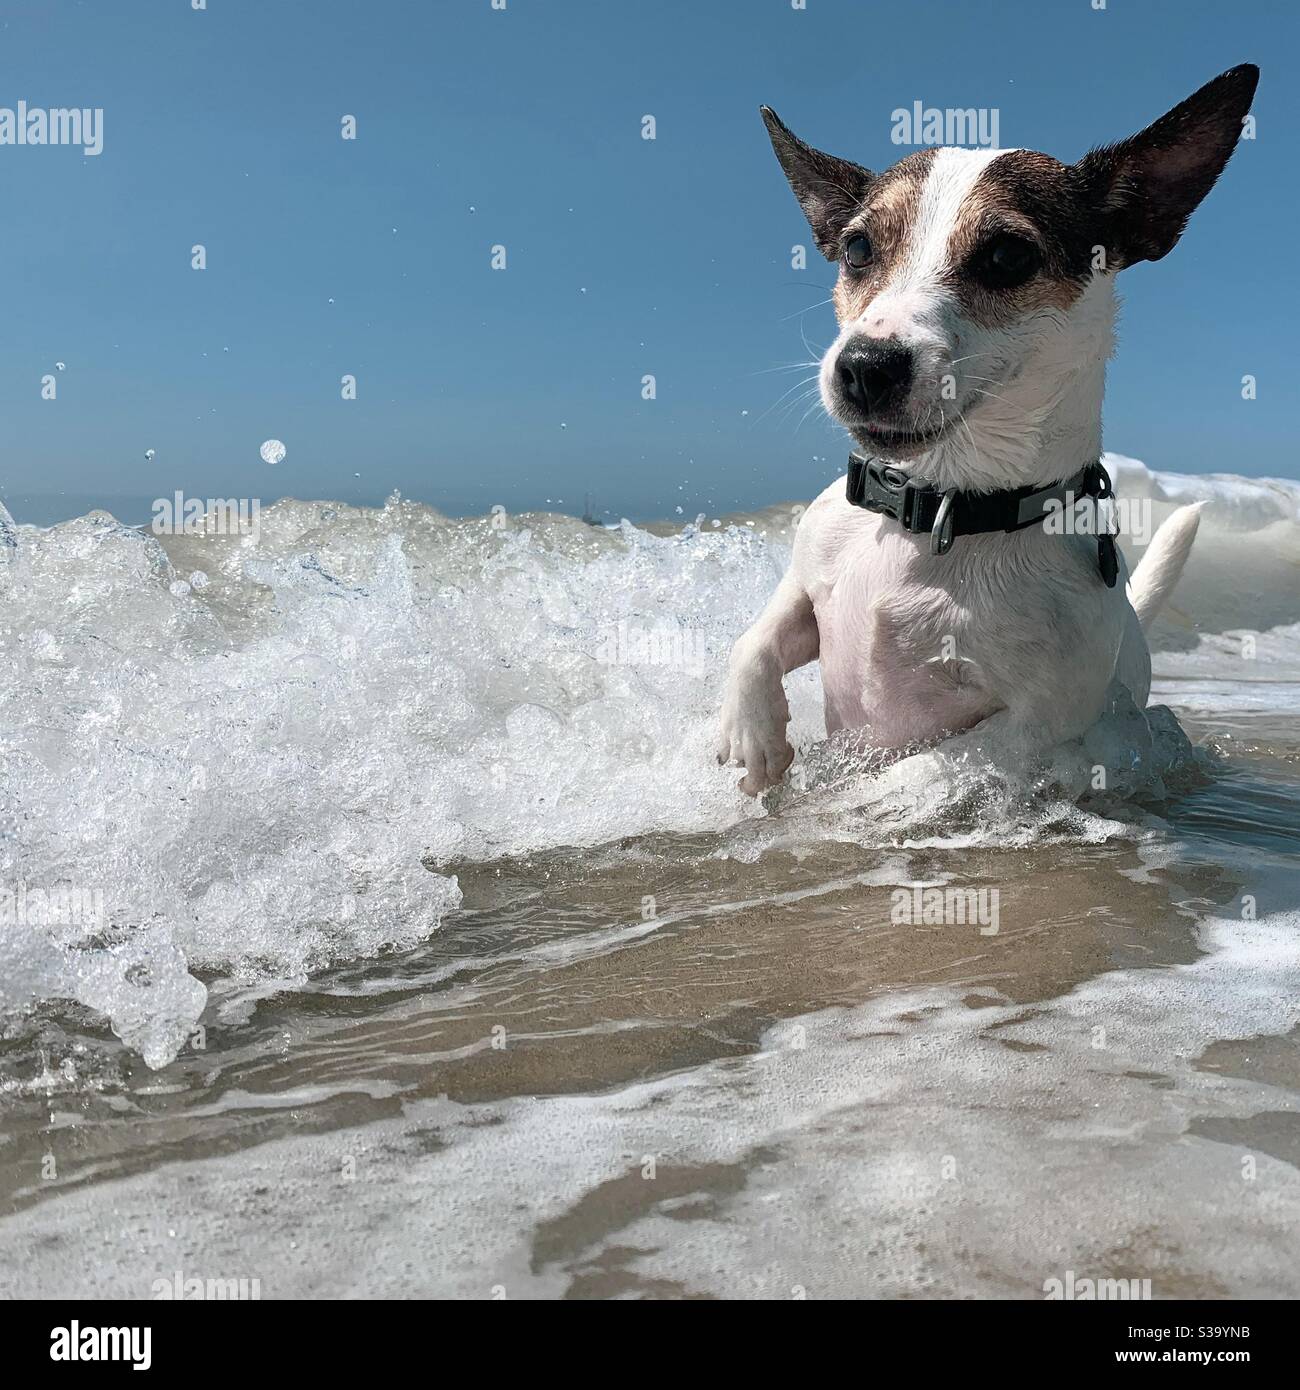 Playful Jack Russell Terrier playing in waves in shallow ocean water on a sunny warm day. Square crop. Stock Photo